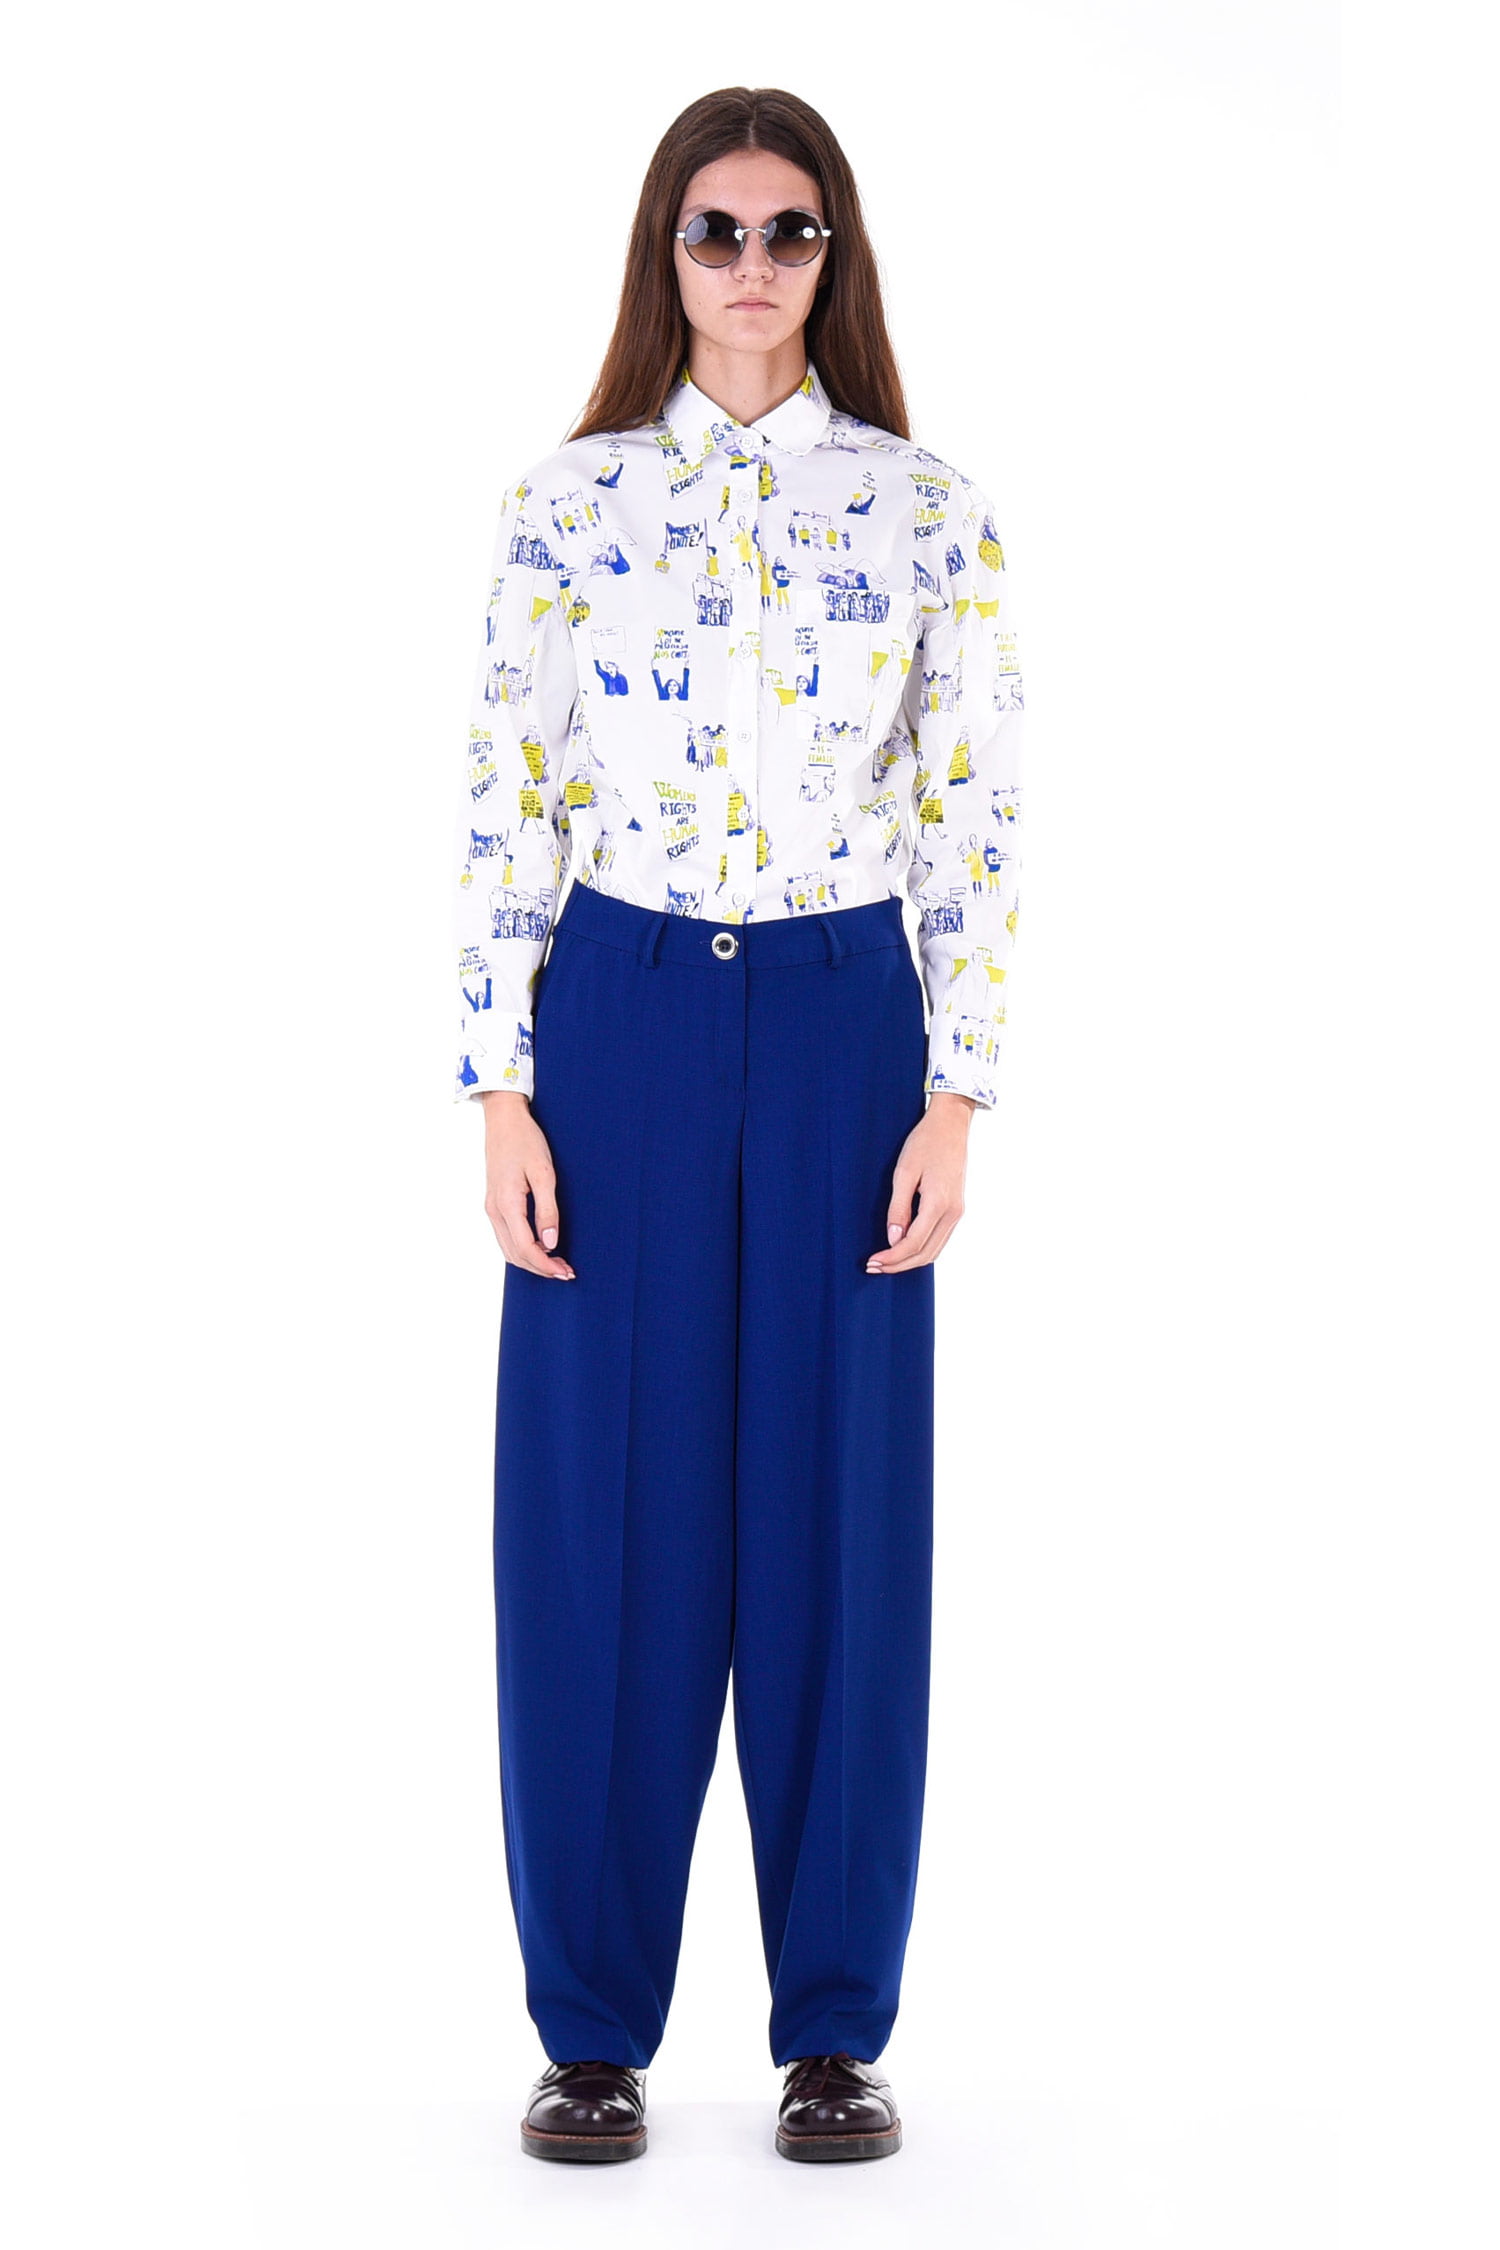 Acephala Aw 2017 18 Blue Trousers Front Scaled